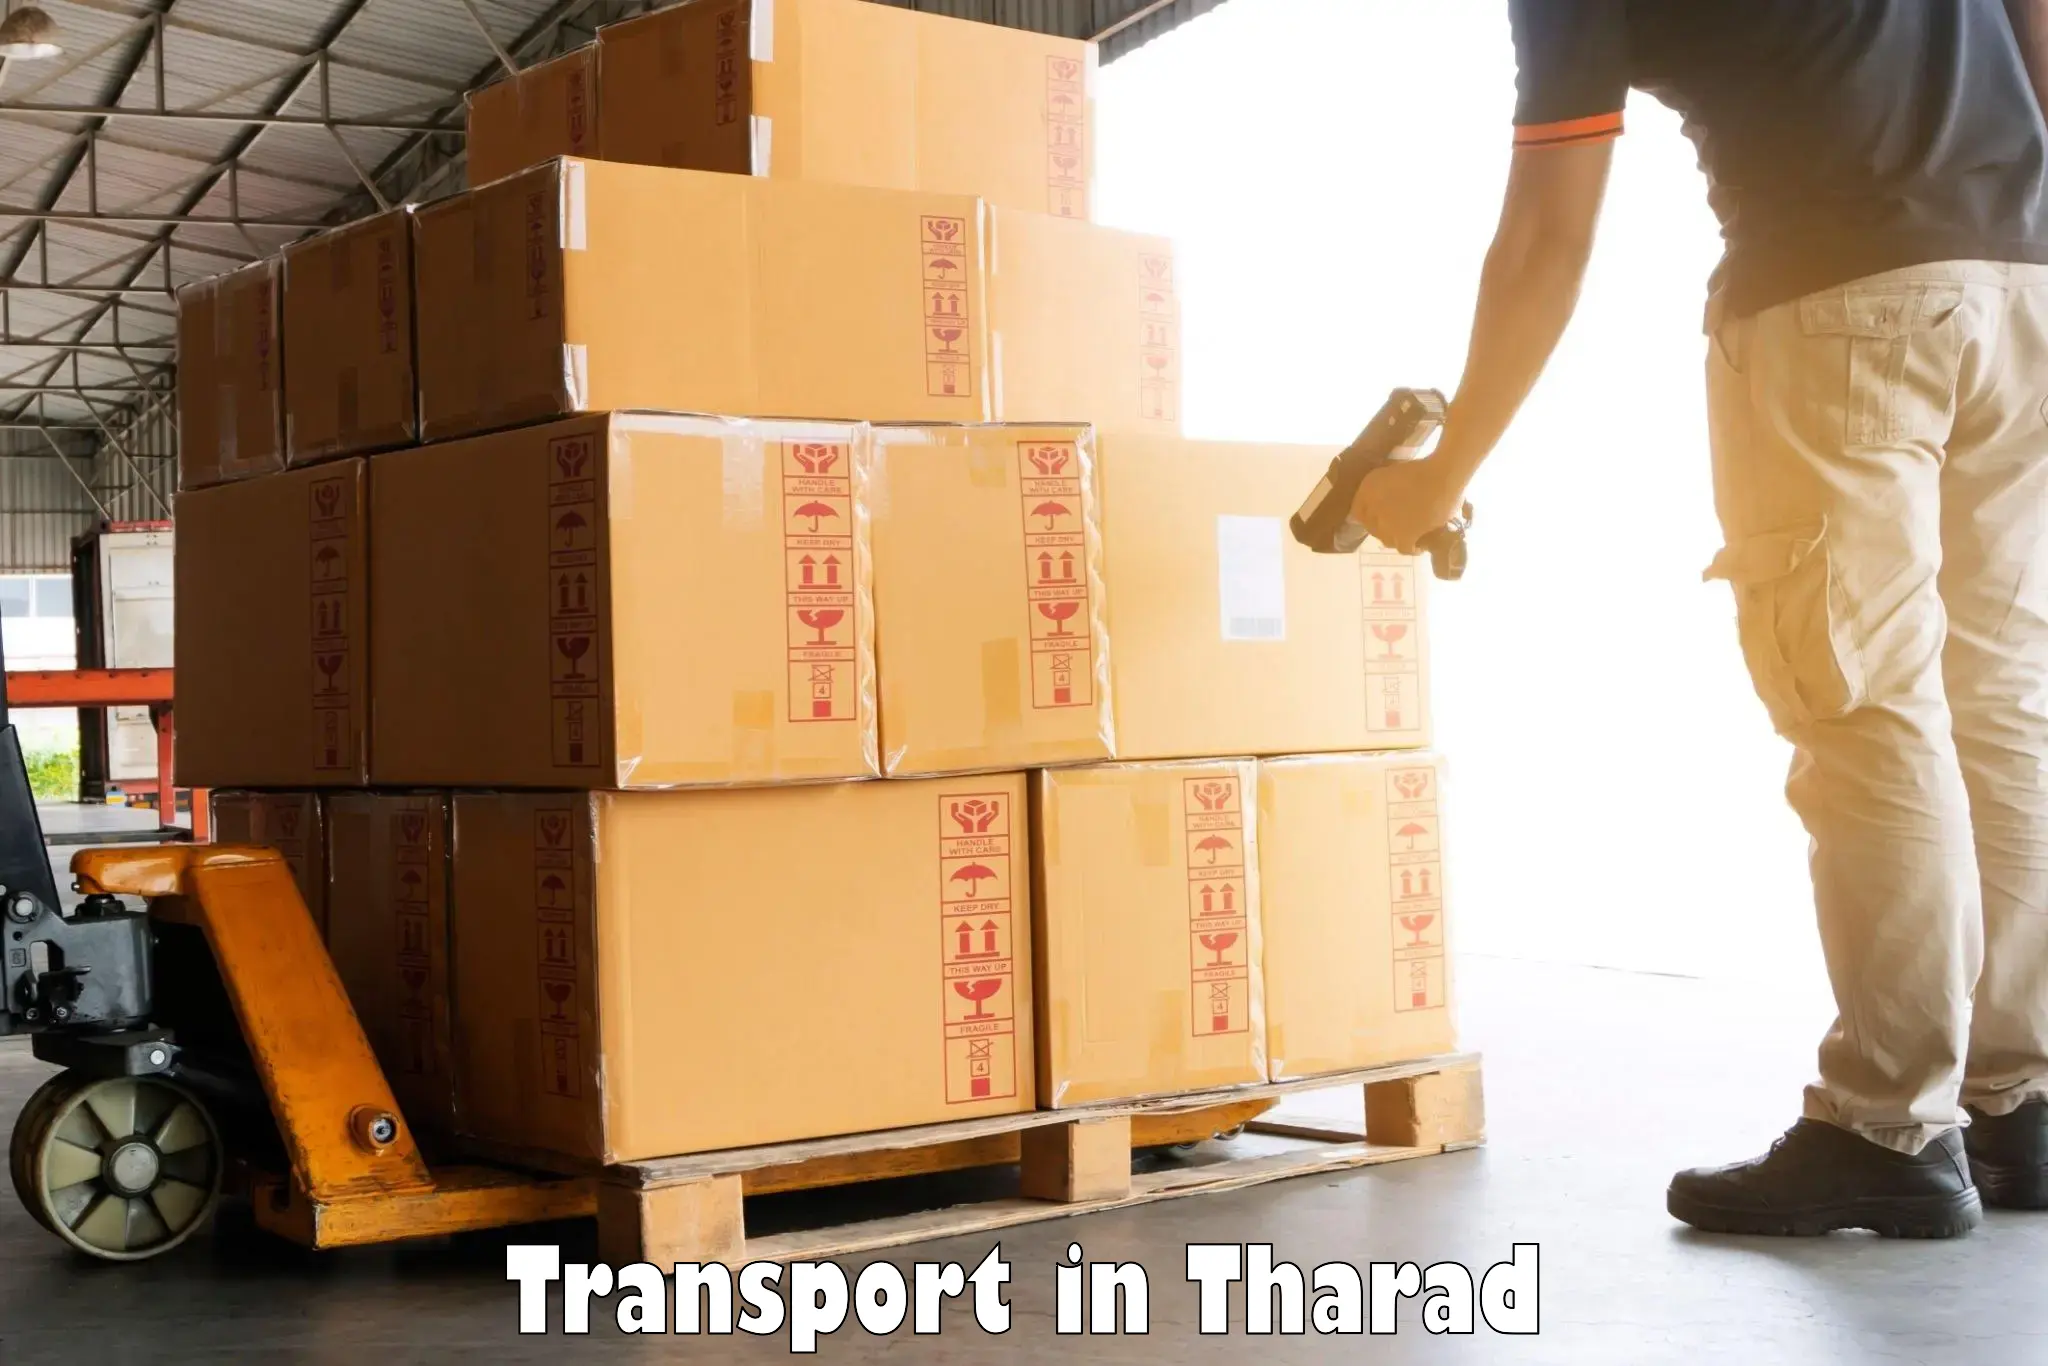 Cargo train transport services in Tharad